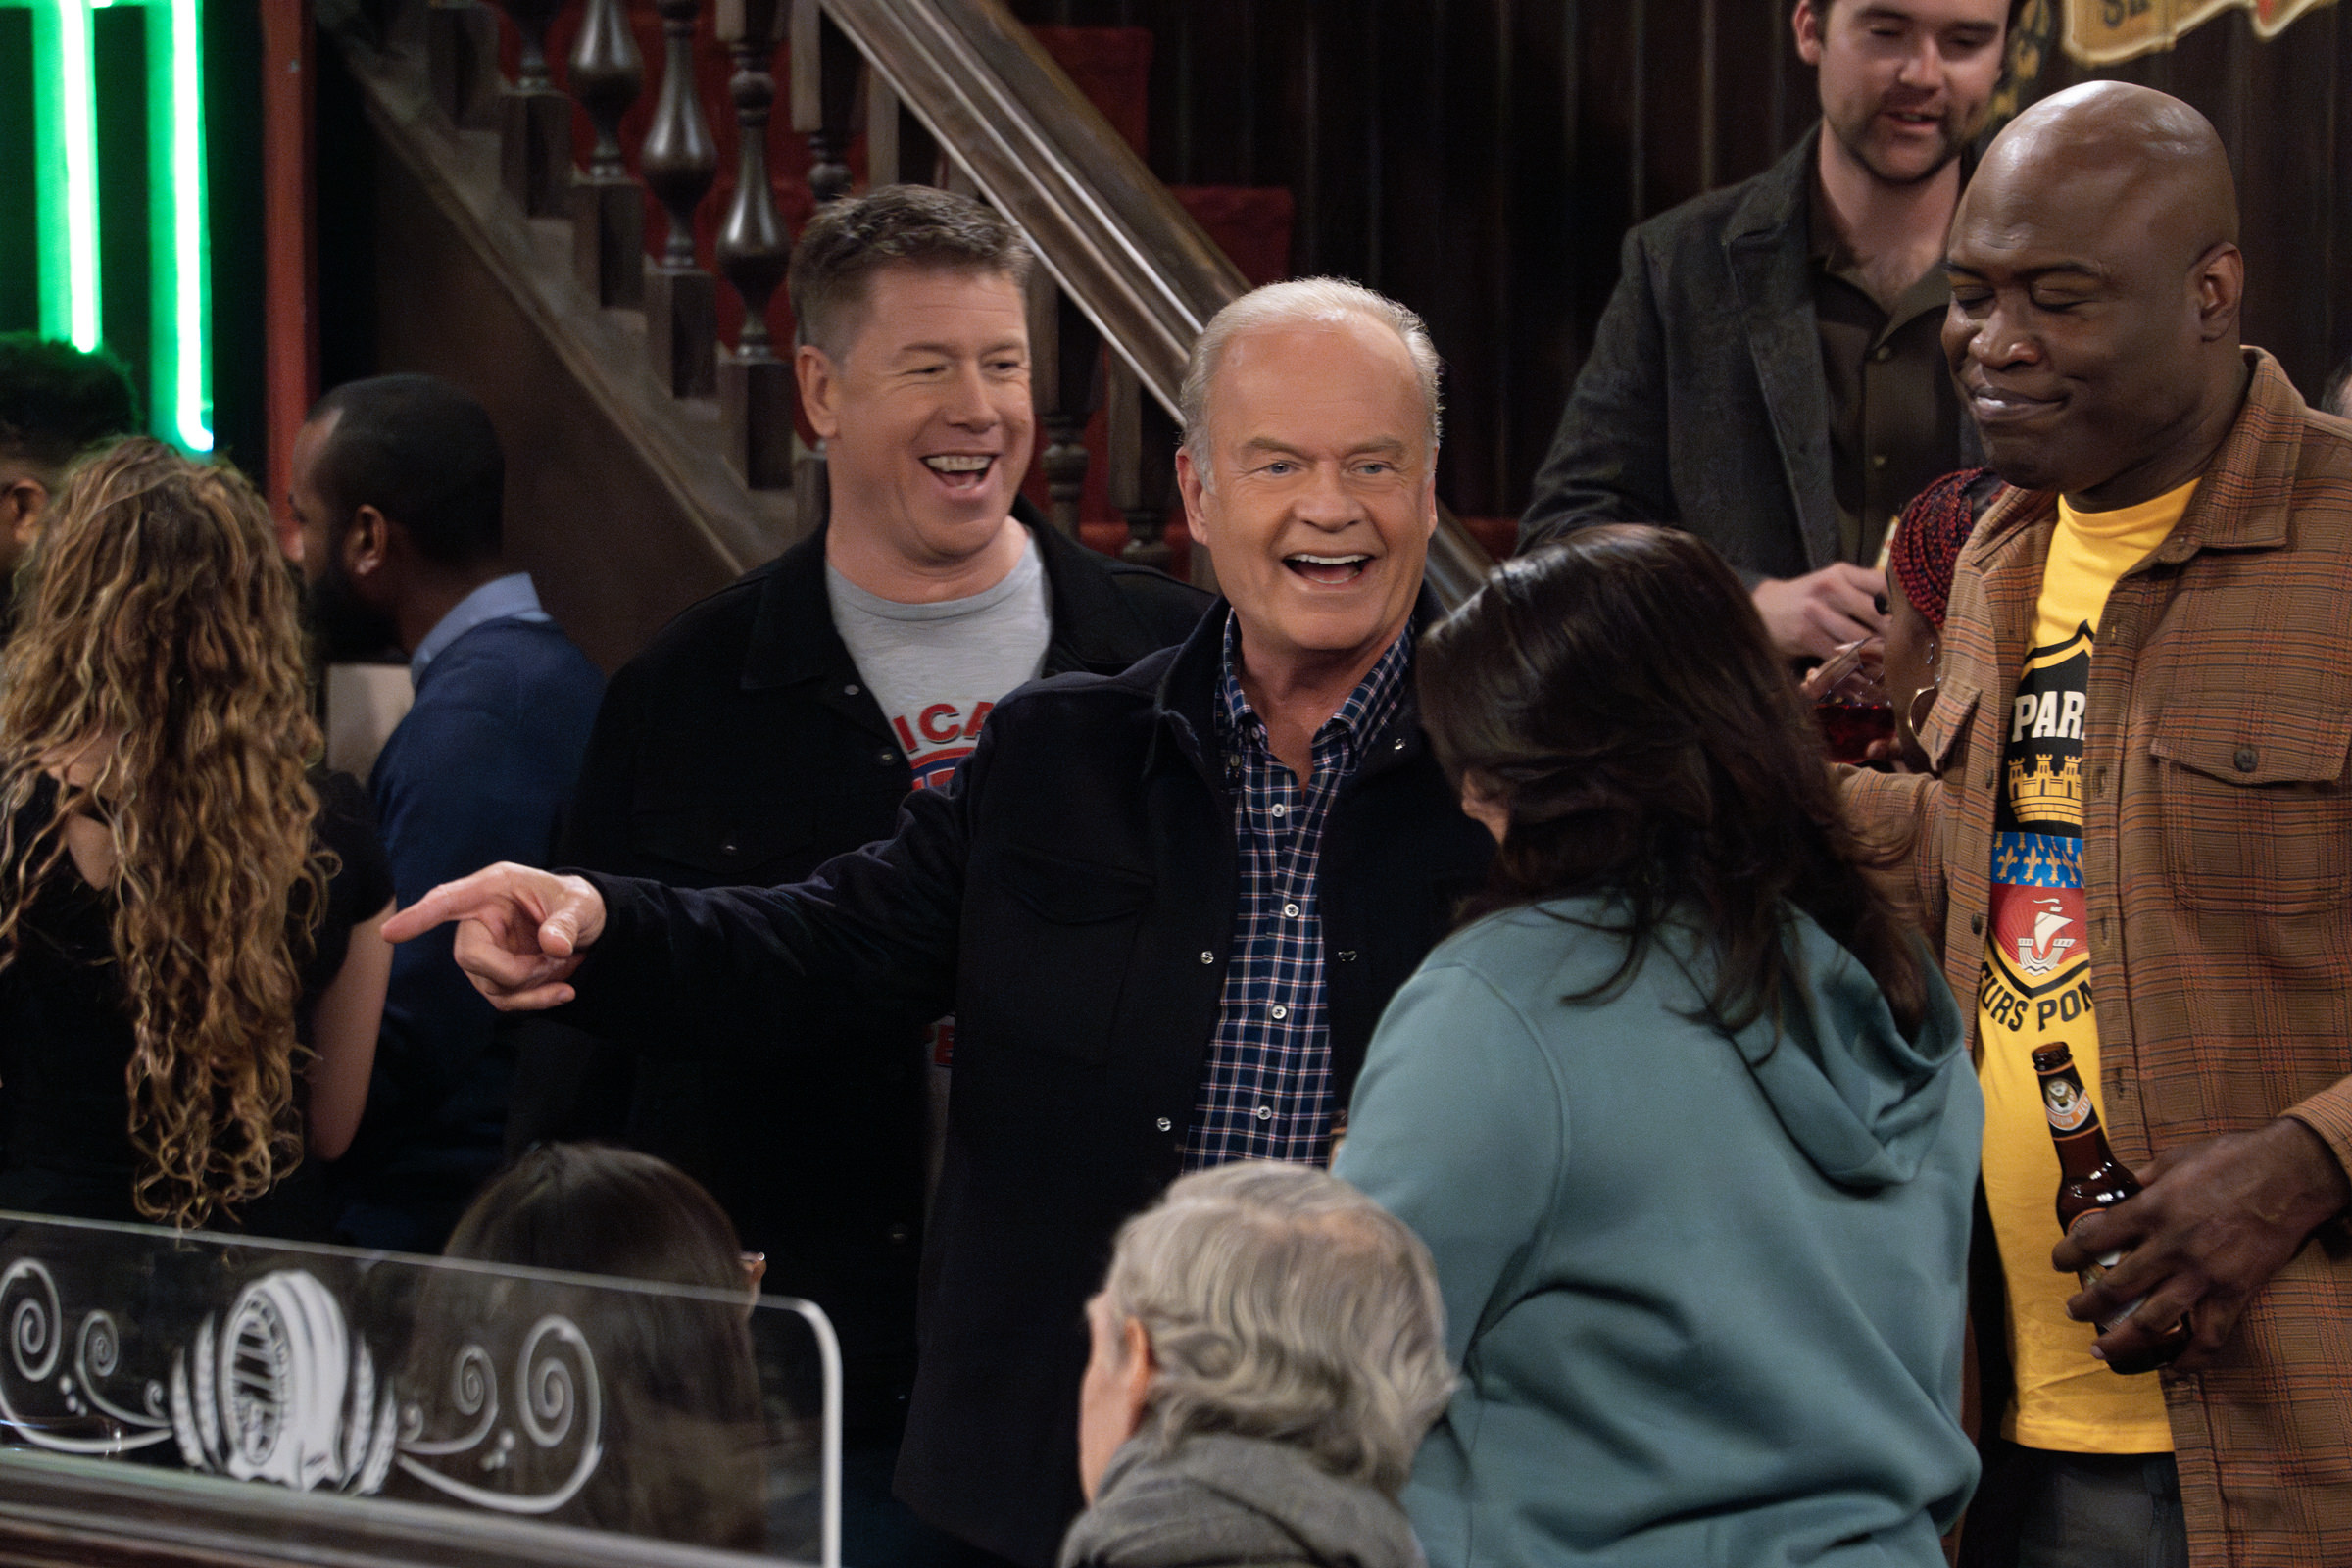 L-R: Jimmy Dunn as Moose, Kelsey Grammer  as Frasier Crane and Kevin Daniels as Tiny in Frasier, episode 4, season 1 streaming on Paramount+, 2023.   Photo credit: Chris Haston/Paramount+